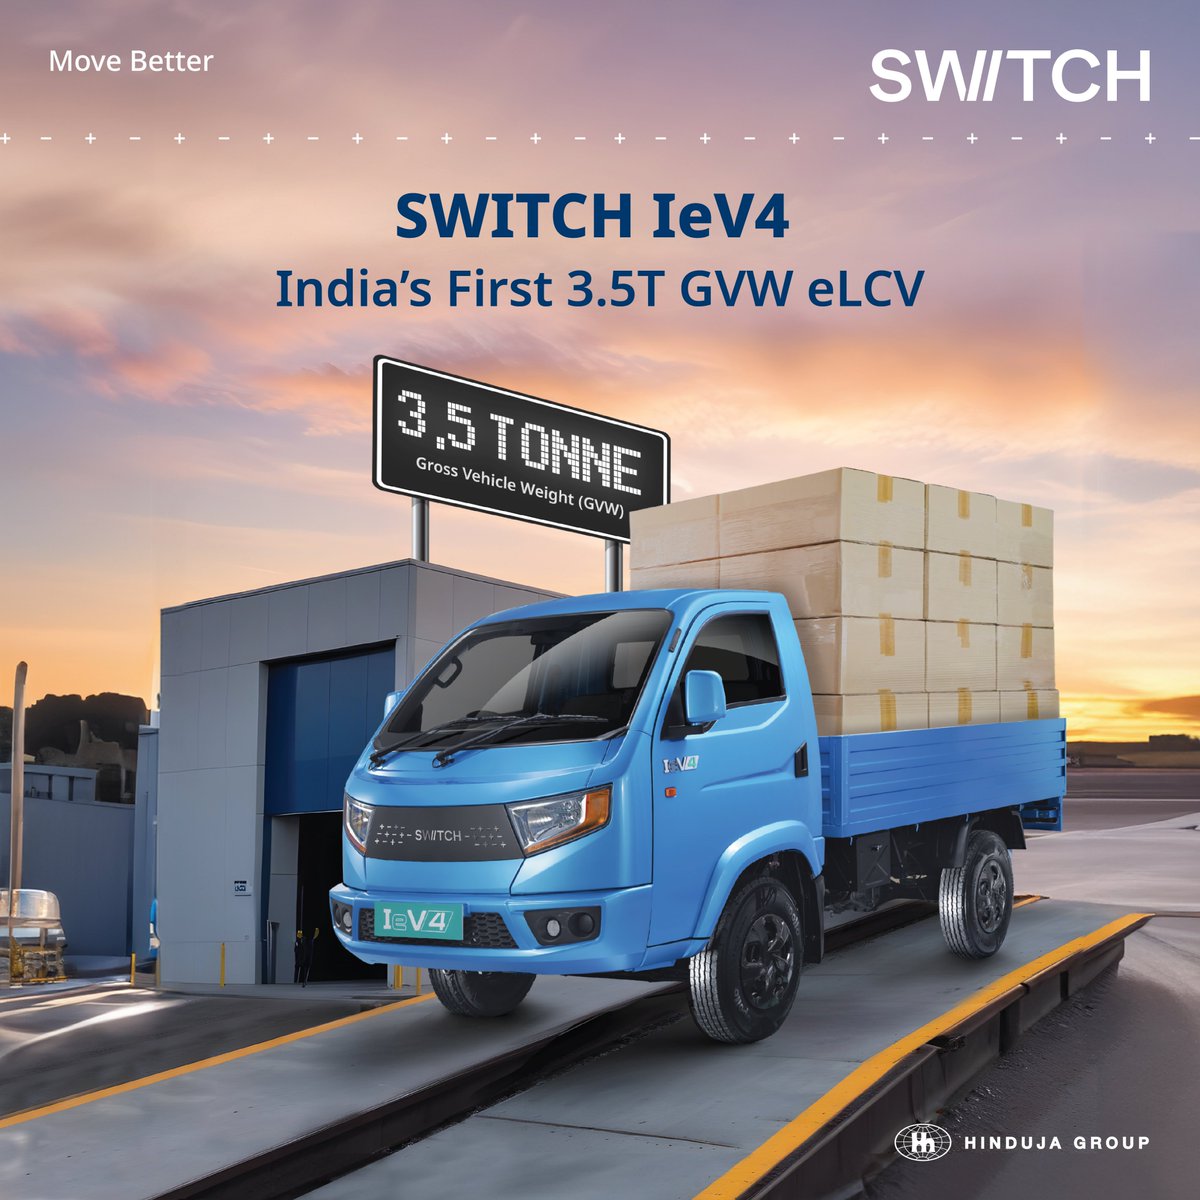 Lead the way towards a greener future with Switch IeV4, India's first to offer a Gross Vehicle Weight (GVW) of 3.5 tonnes, revolutionizing transportation with unmatched sustainability and performance.

#SwitchMobility #ElectricVehicles #MoveBetter #EcoFriendly #ZeroEmissions